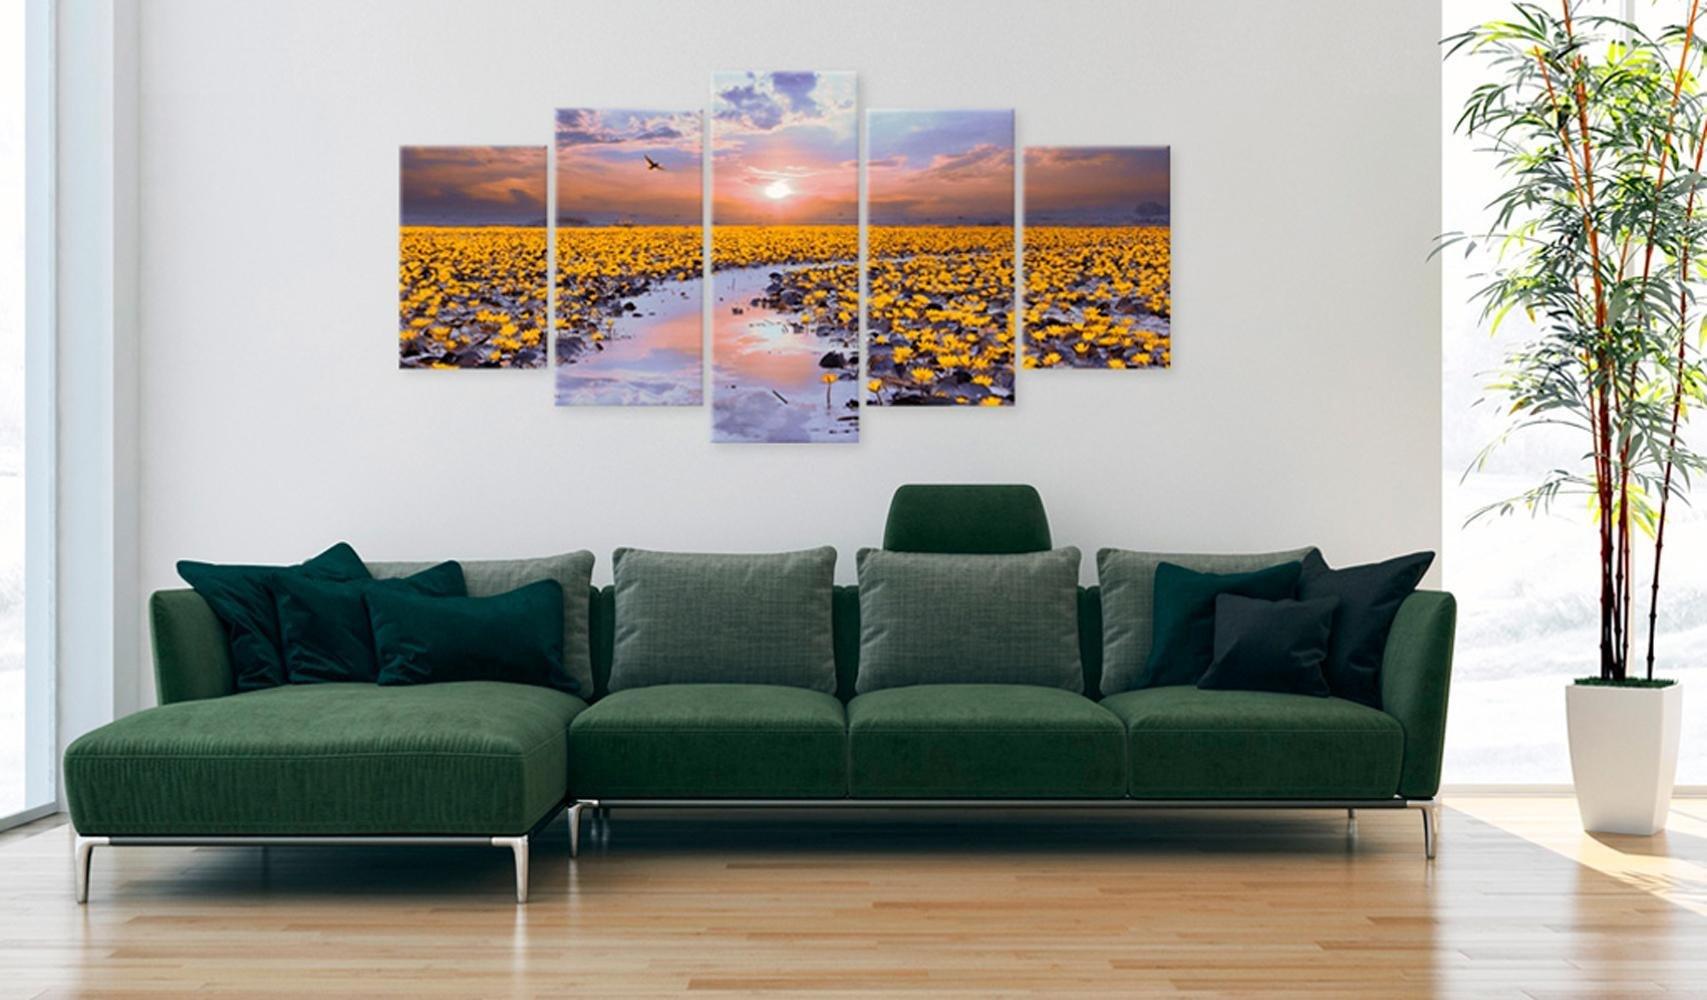 Canvas Print - The River of Light - www.trendingbestsellers.com